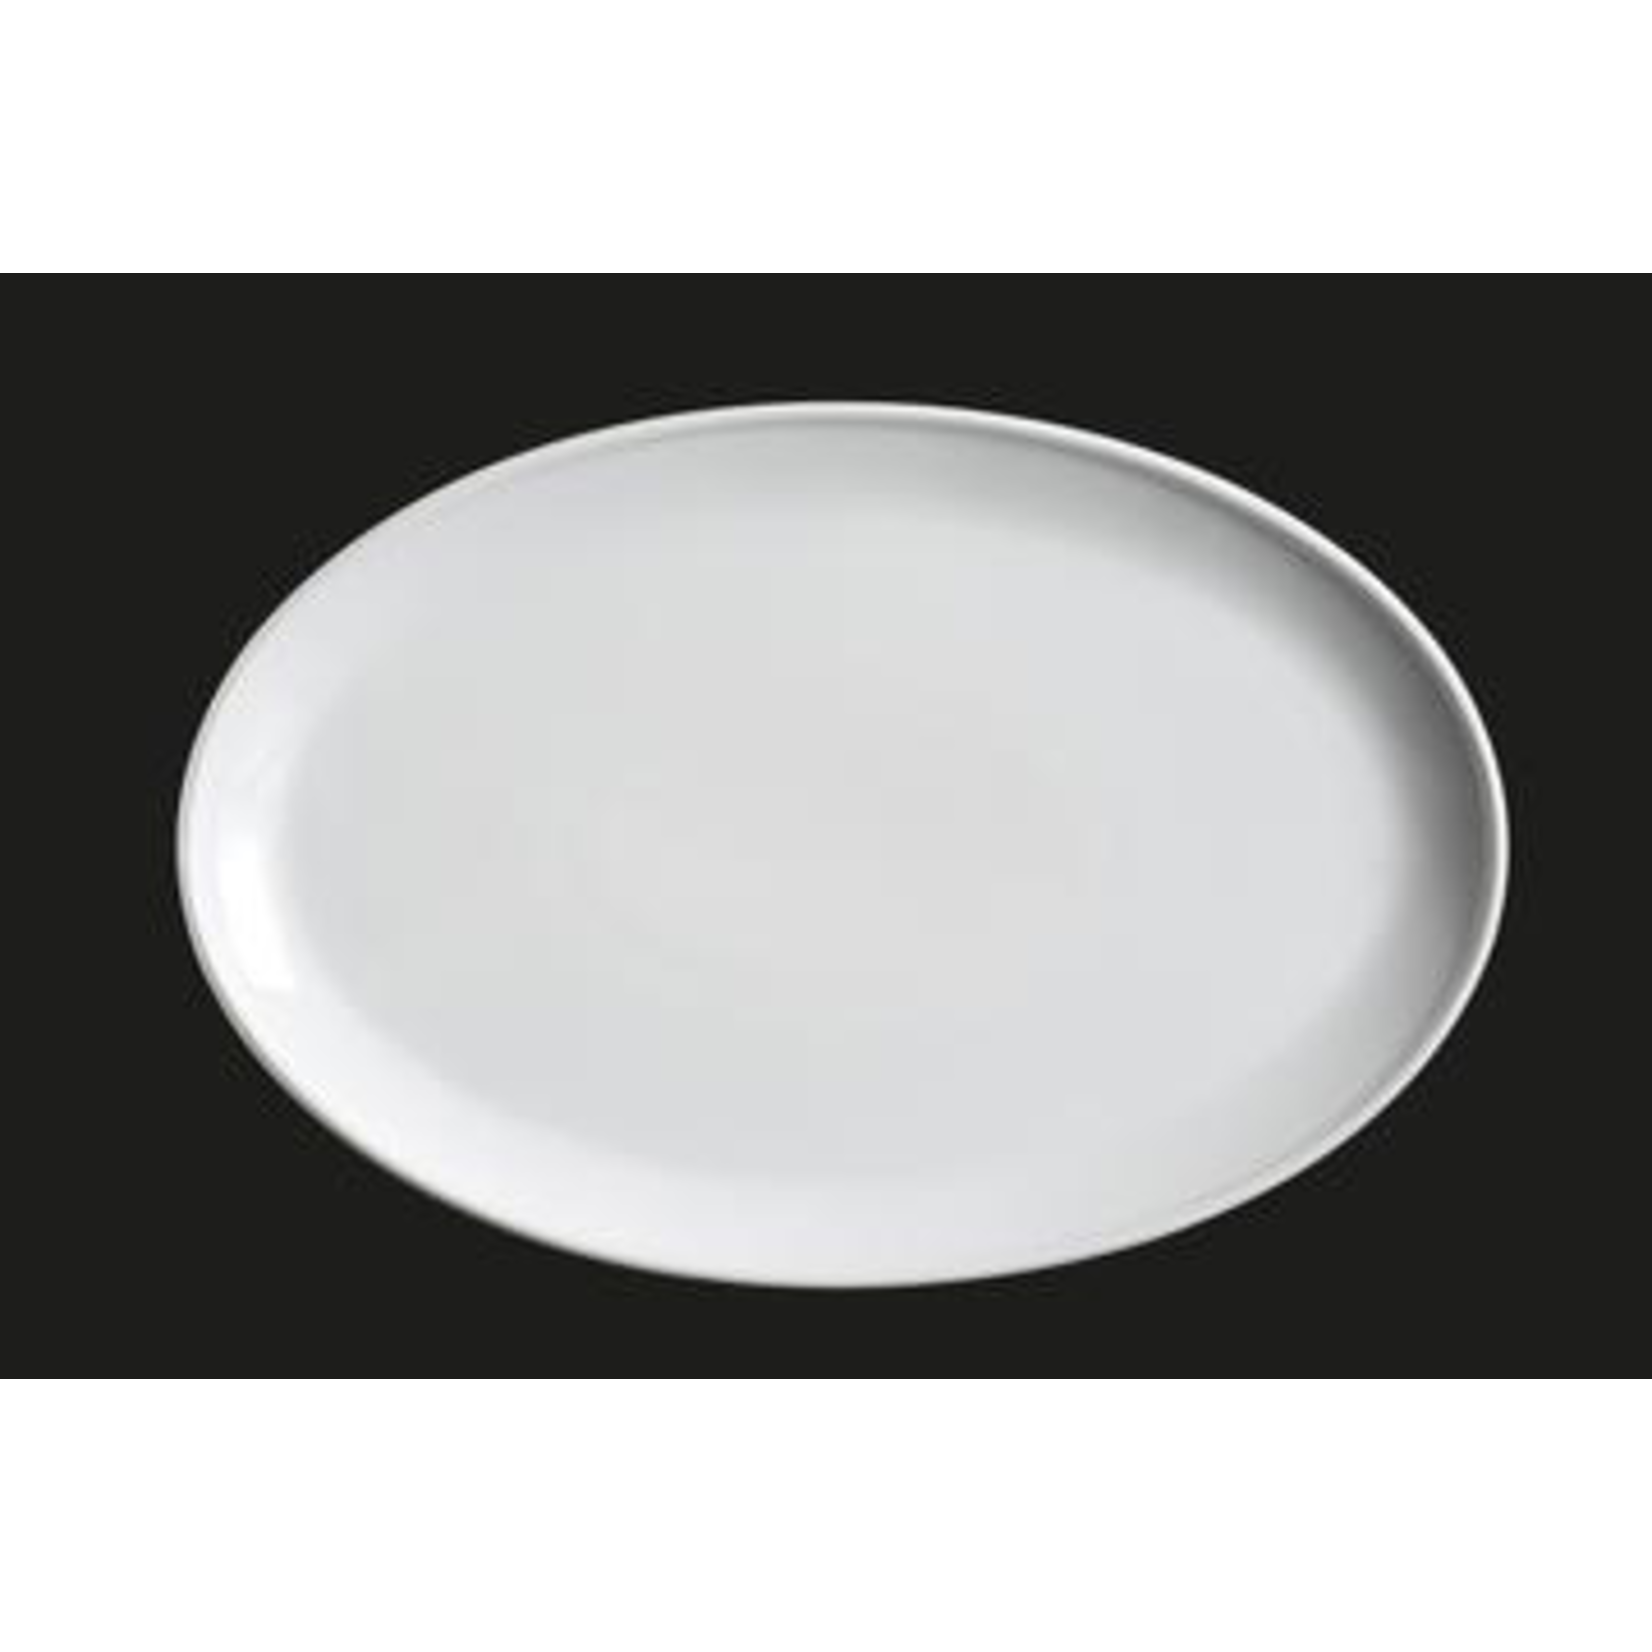 Palate and Plate AW-0145 13” x 8.75” Oval Platter 12/cs